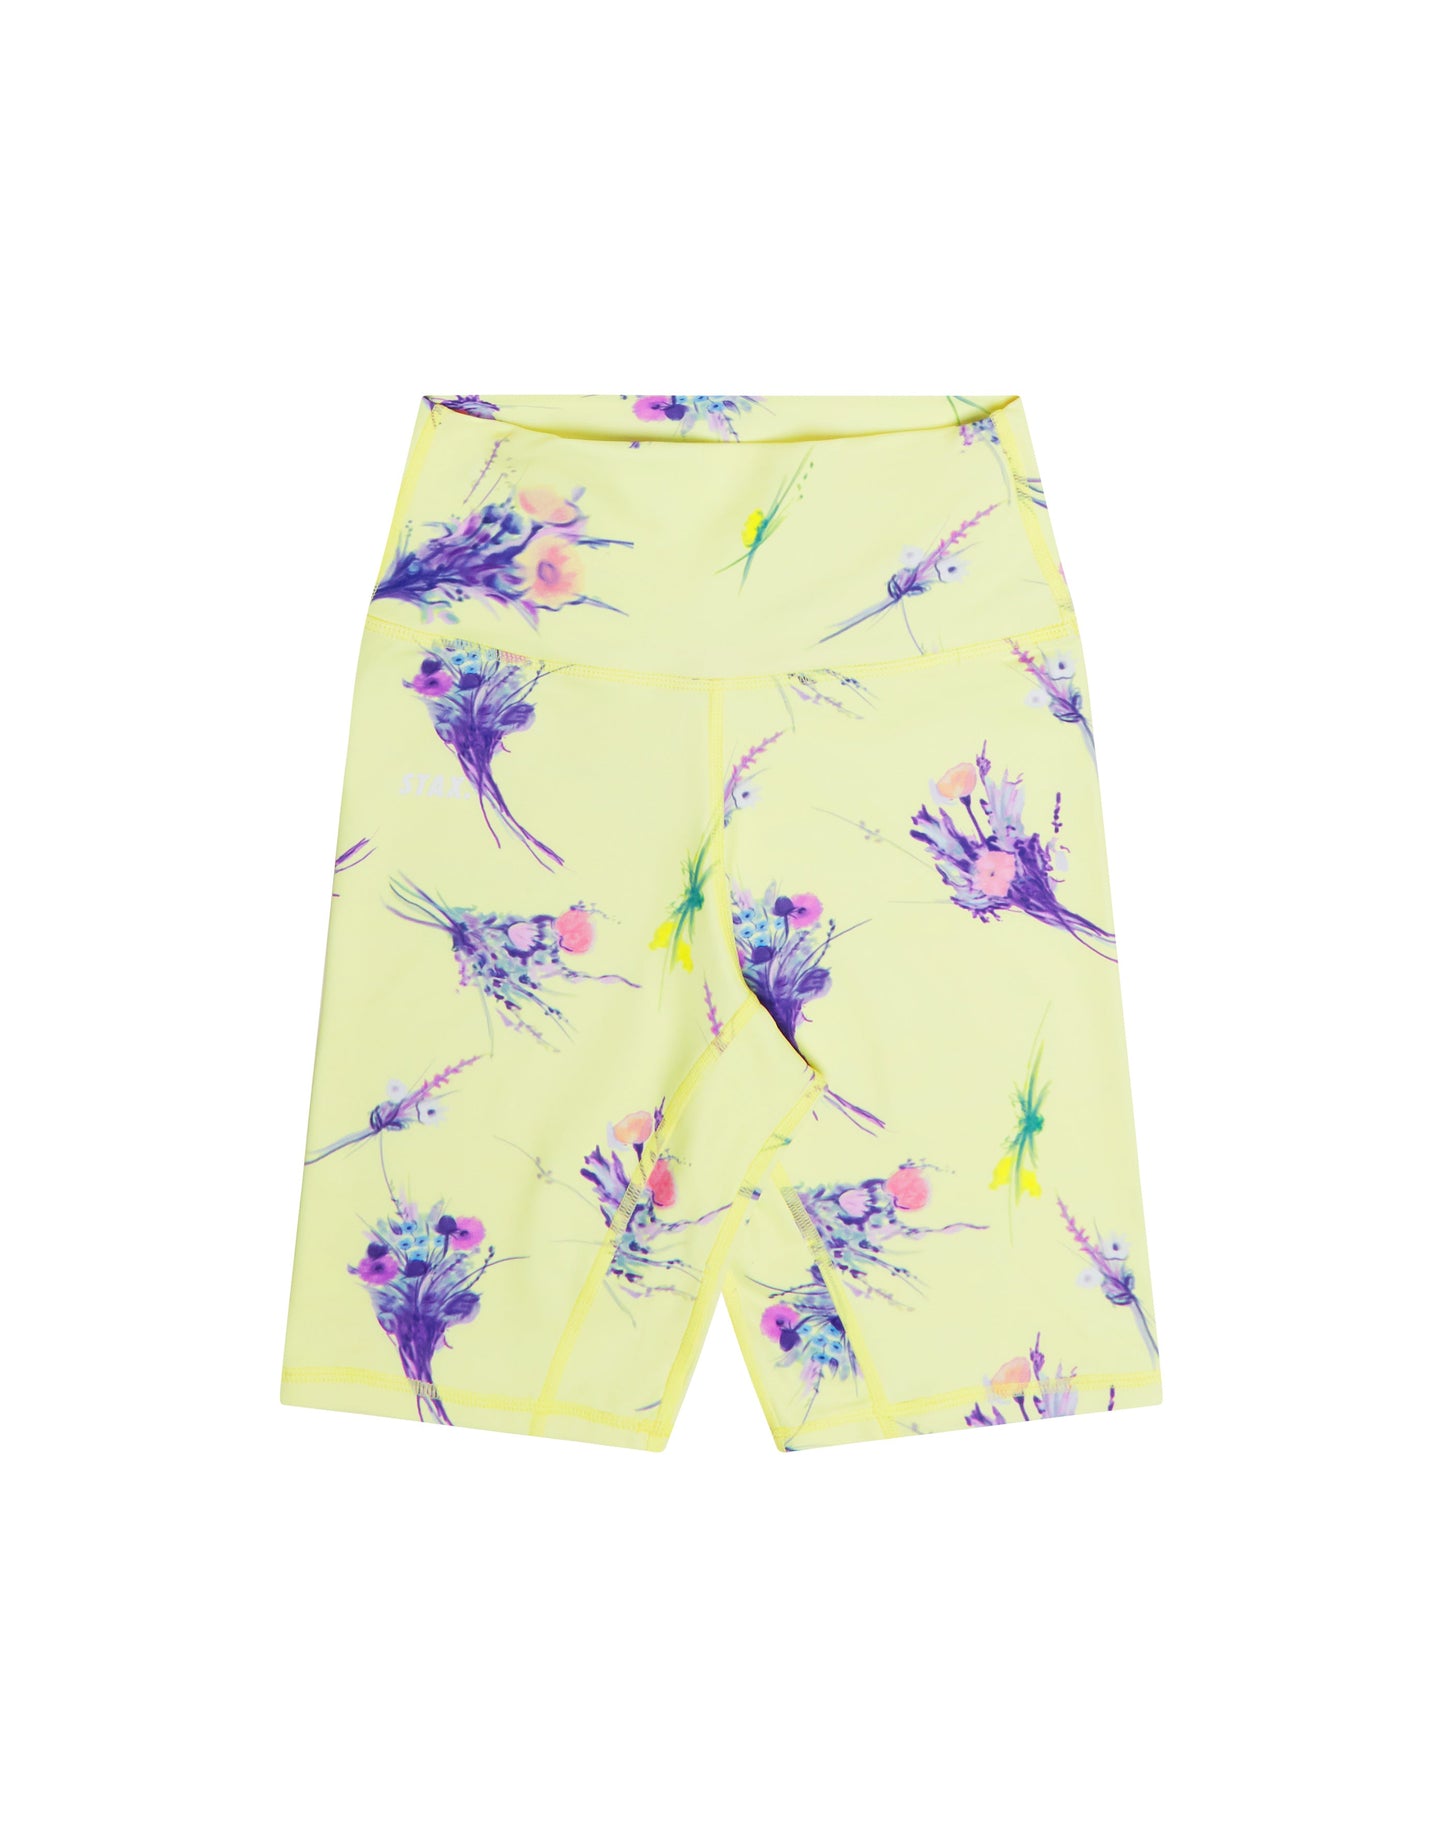 Spring Collection Bike Shorts - Sunflower